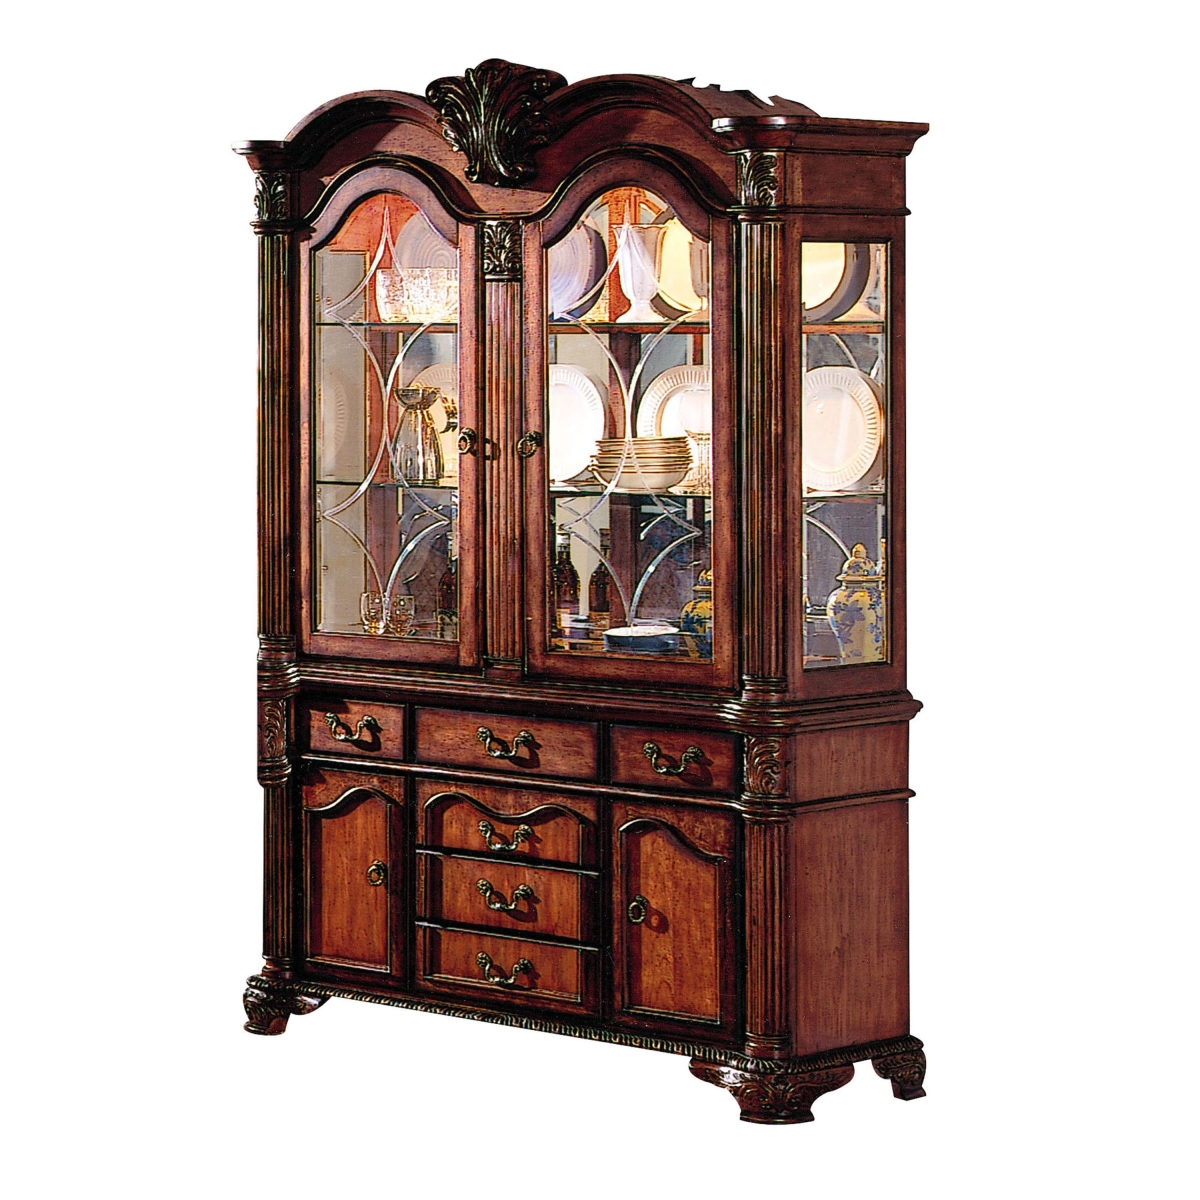 Picture of HomeRoots 346970 21 x 61 x 88 in. Cherry Wood Poly Resin Glass Mirror Hutch & Buffet